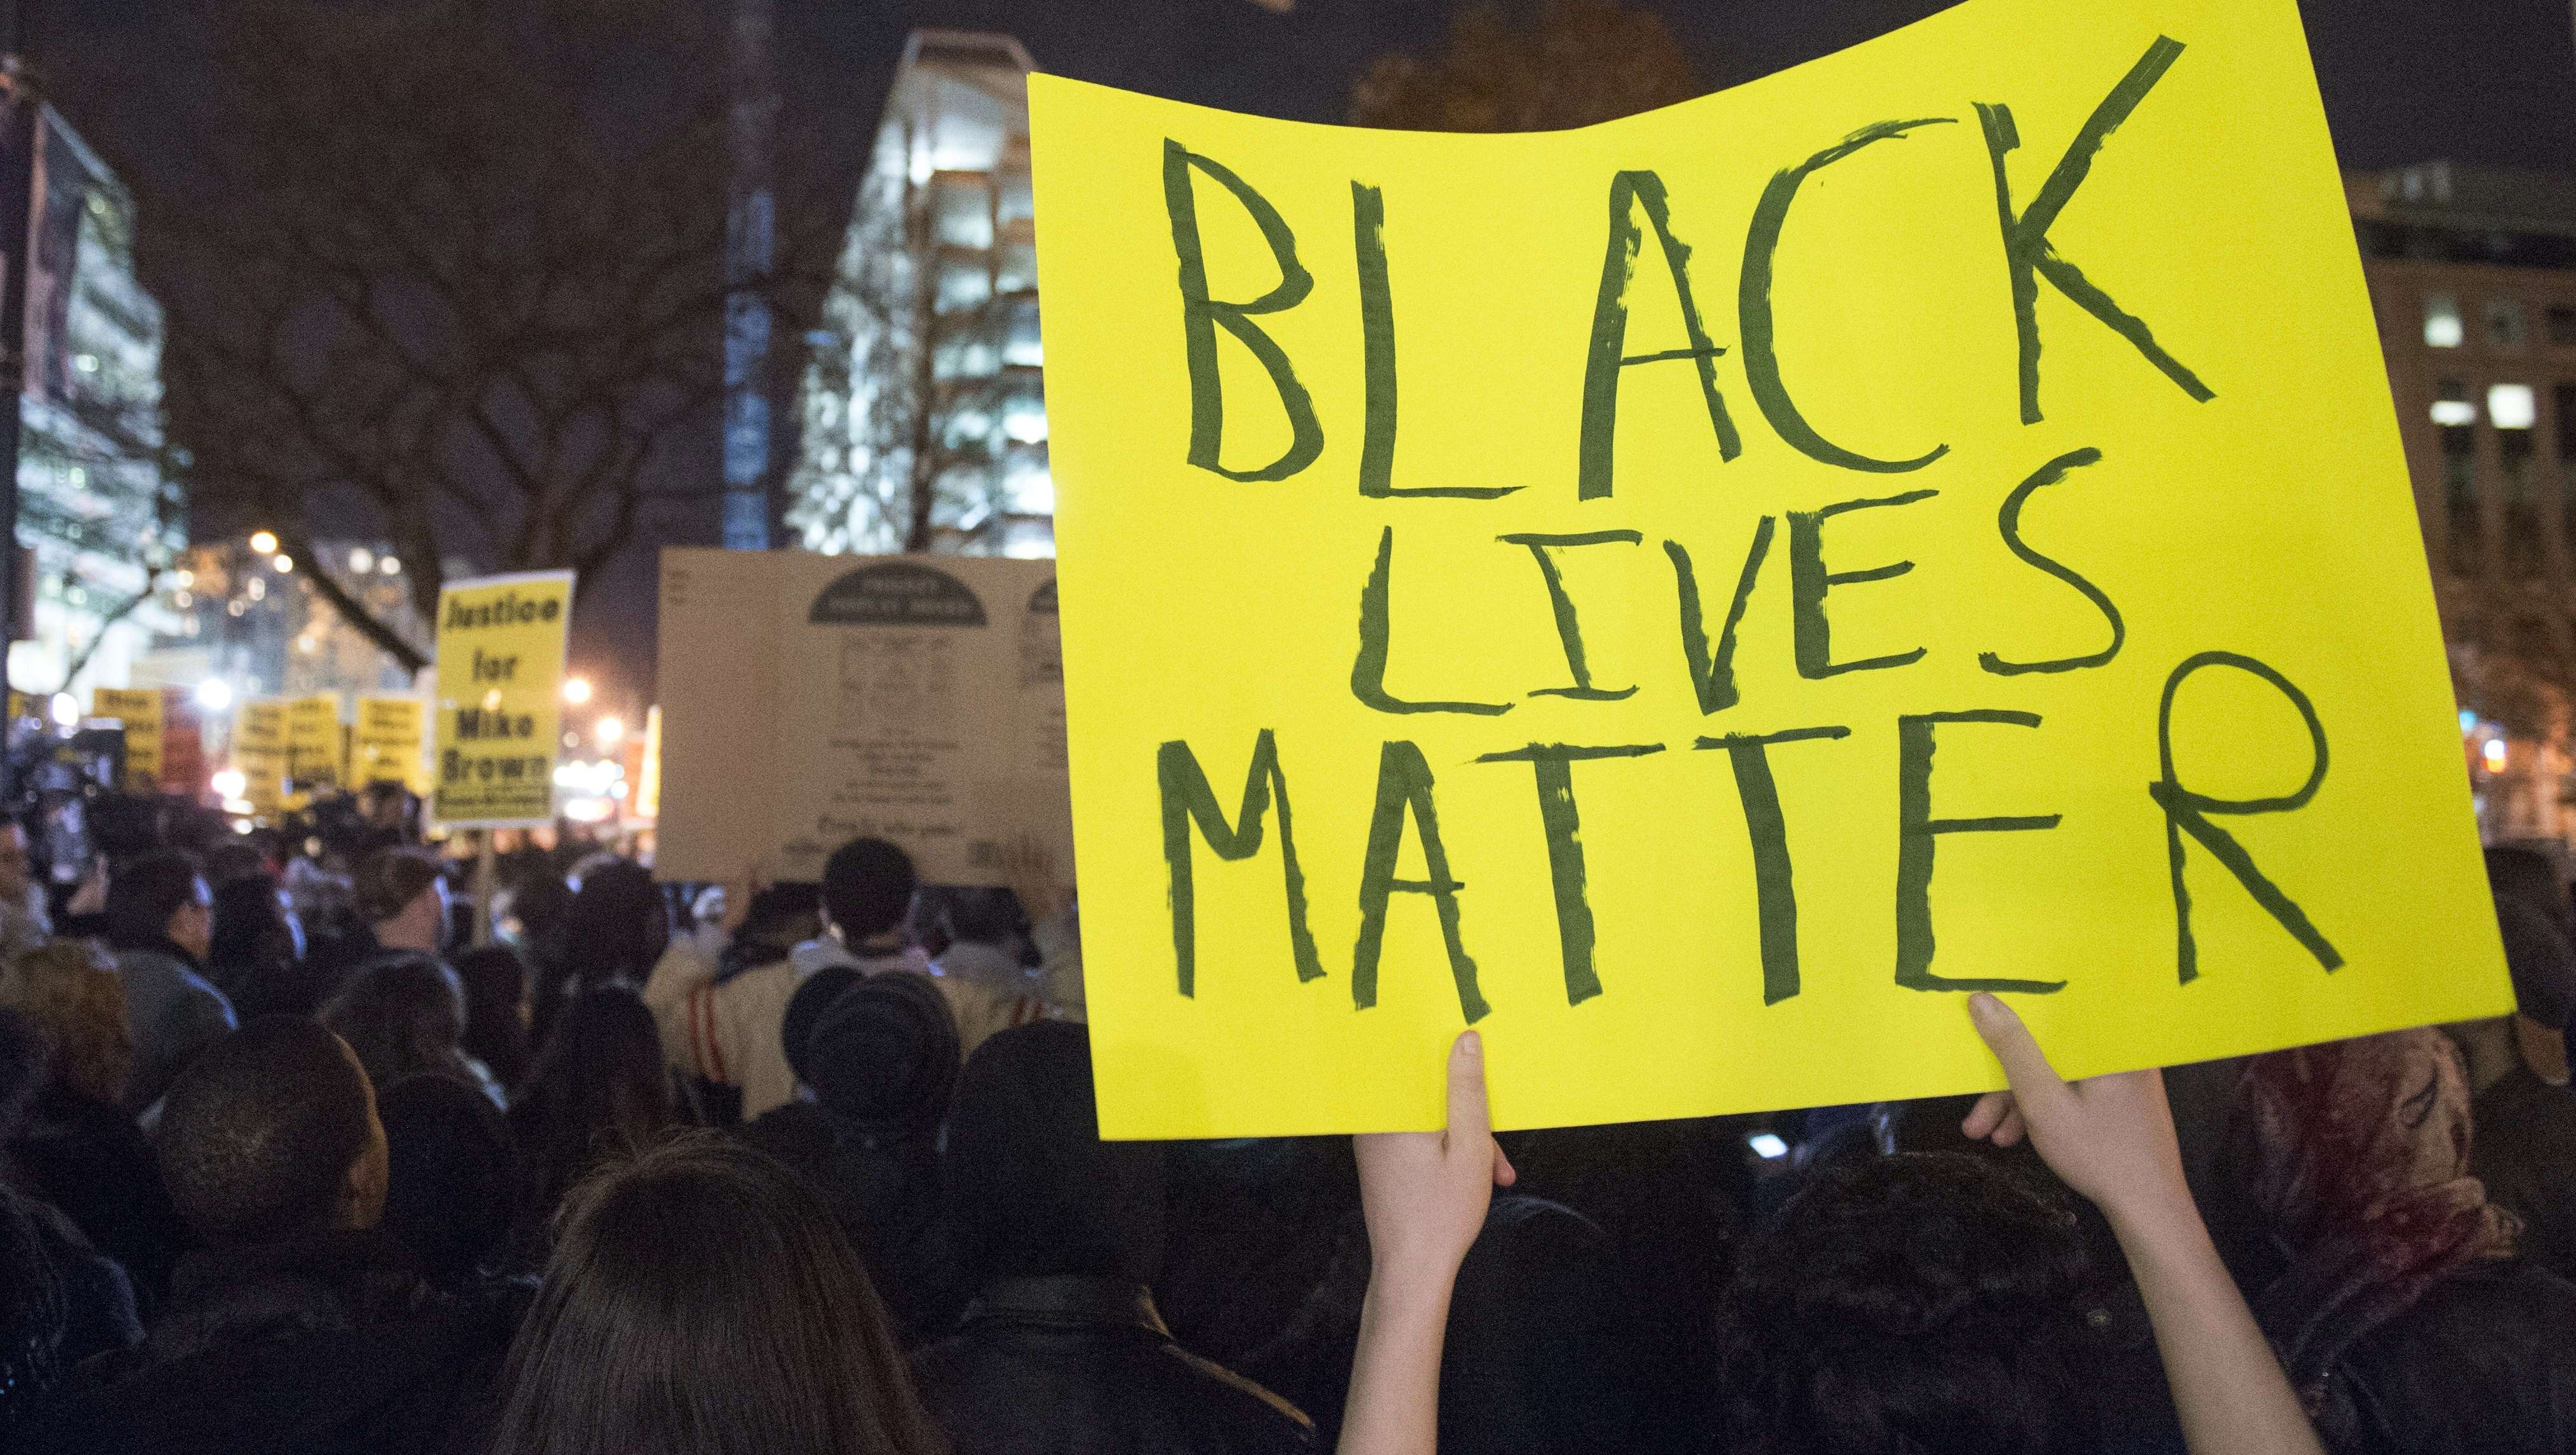 More protests in wake of grand jury decision on Ferguson